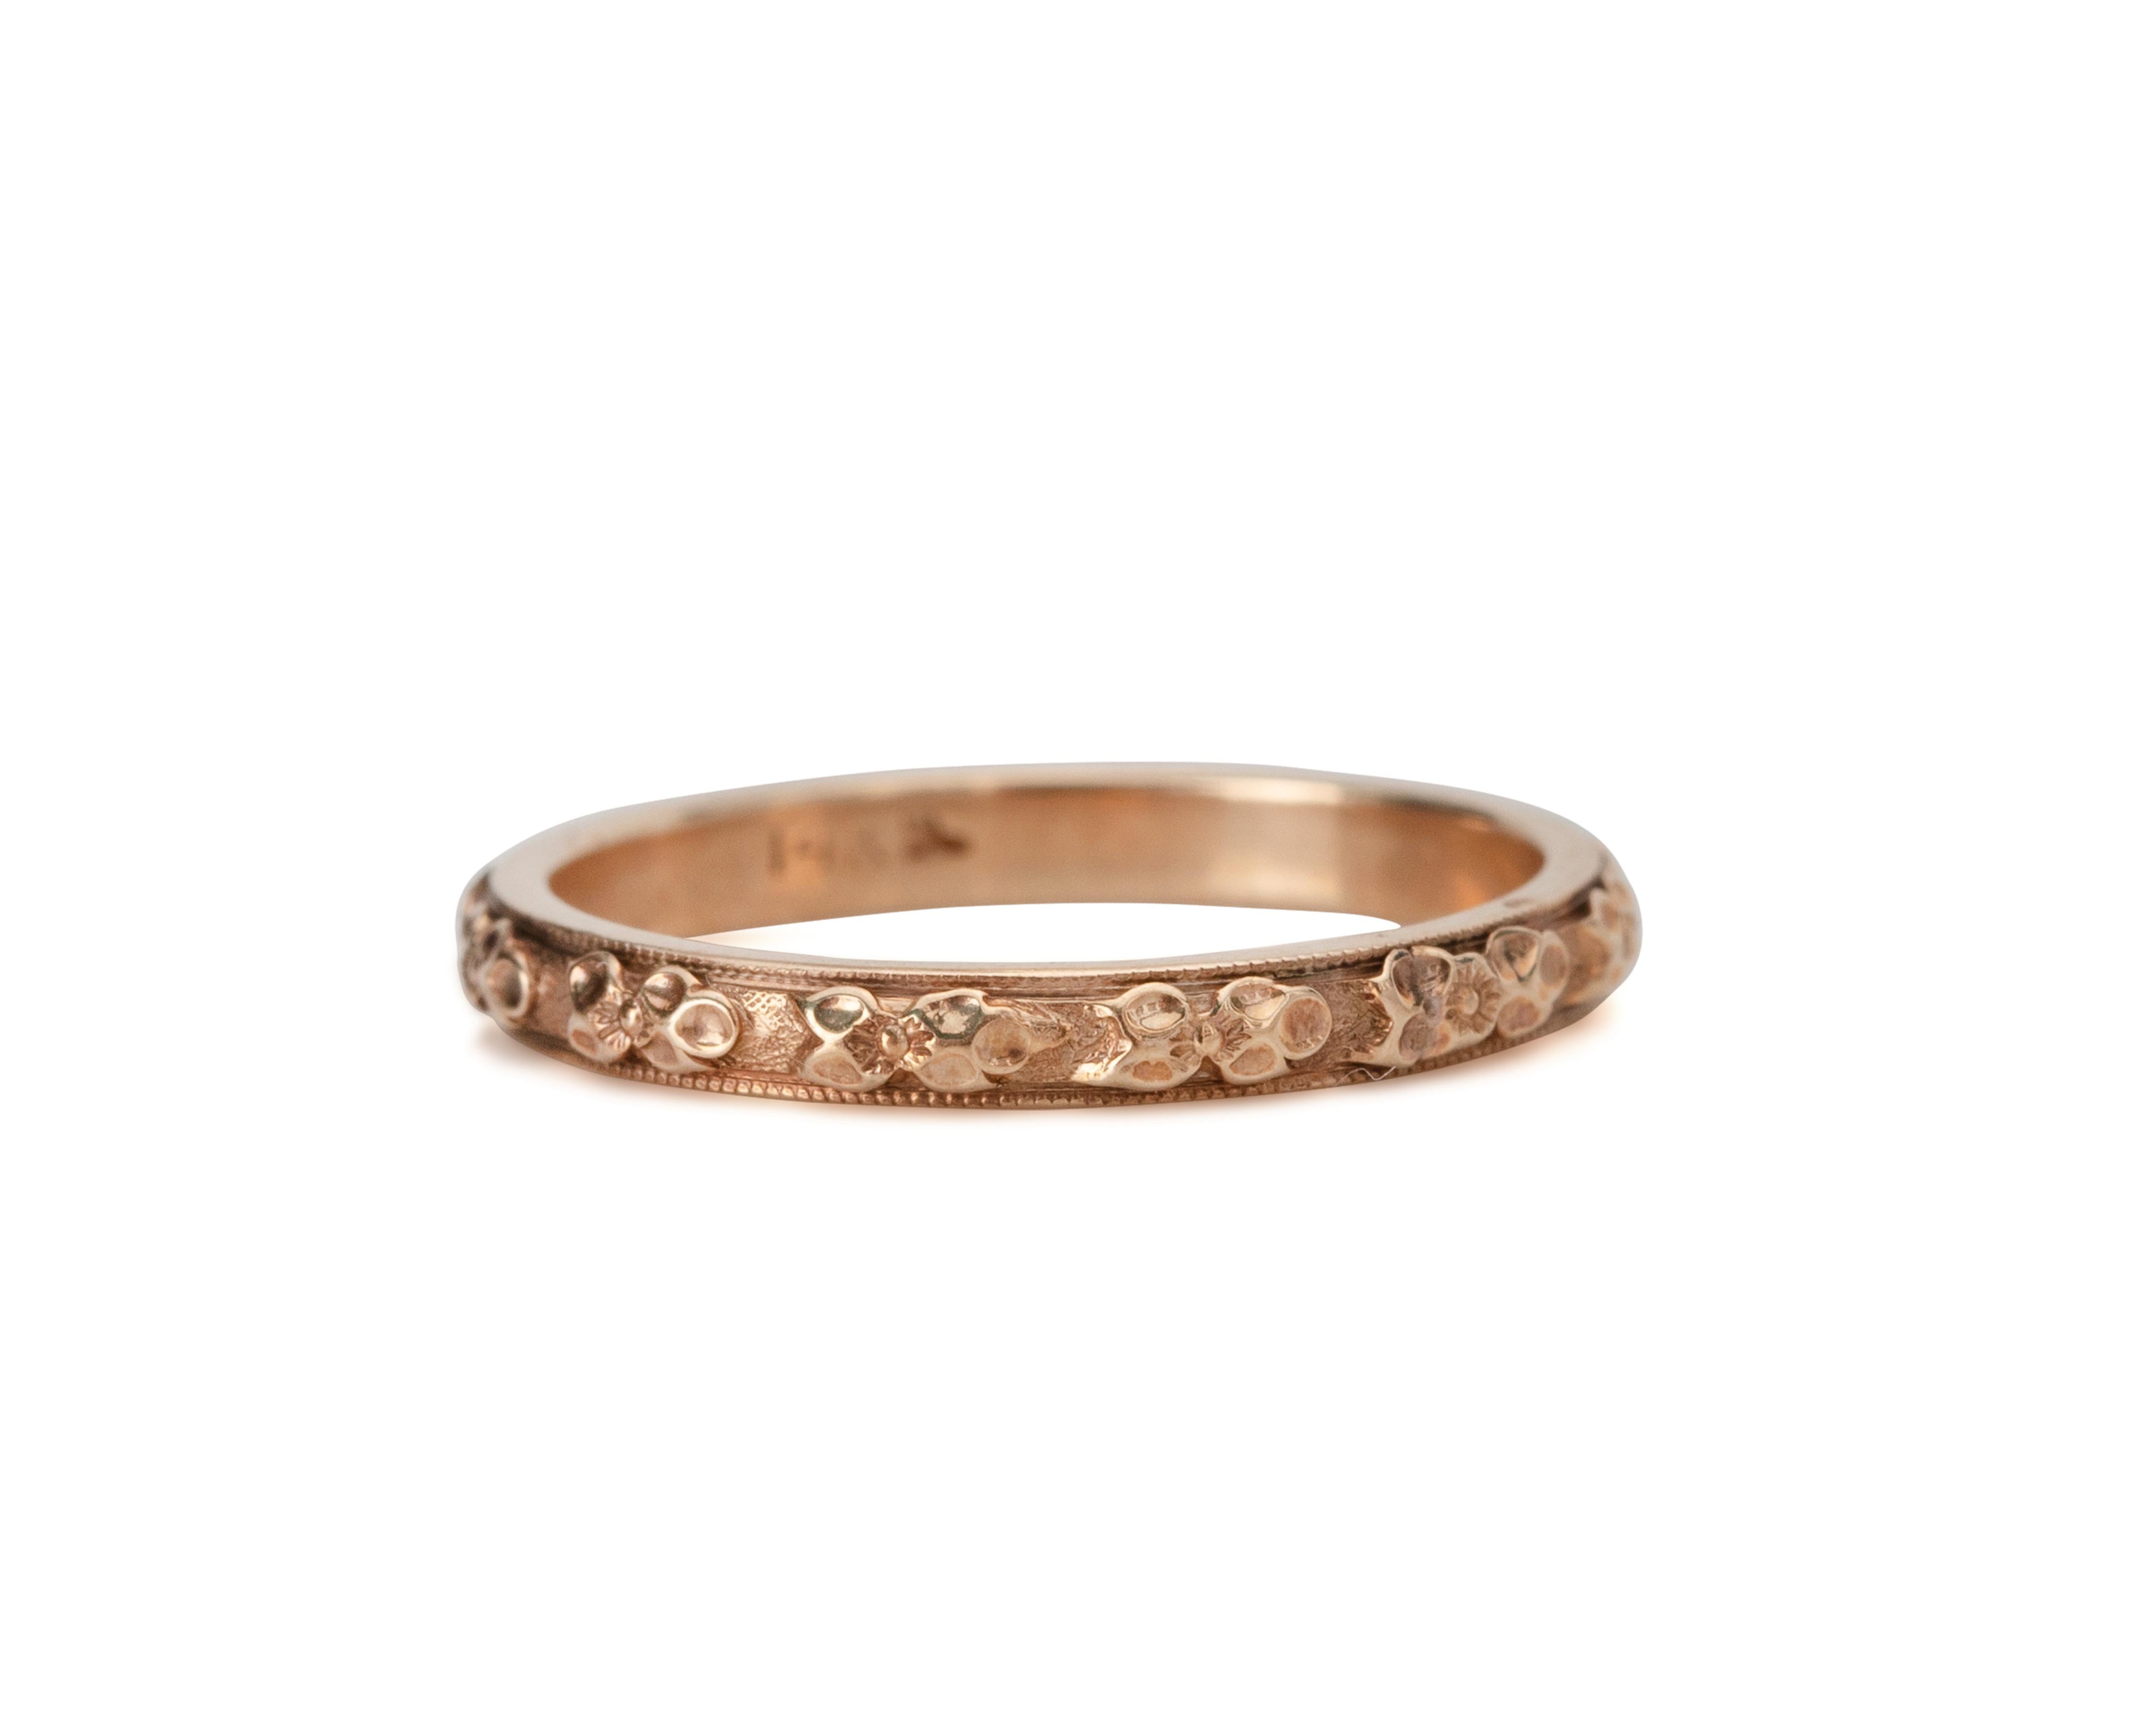 Description: 
This piece is a genuine 1920's yellow gold wedding band! This beautiful dainty band is an excellent example of the early 20th-century style! Likely from the 1920's this Art Deco beauty features a floral carved design all of the way